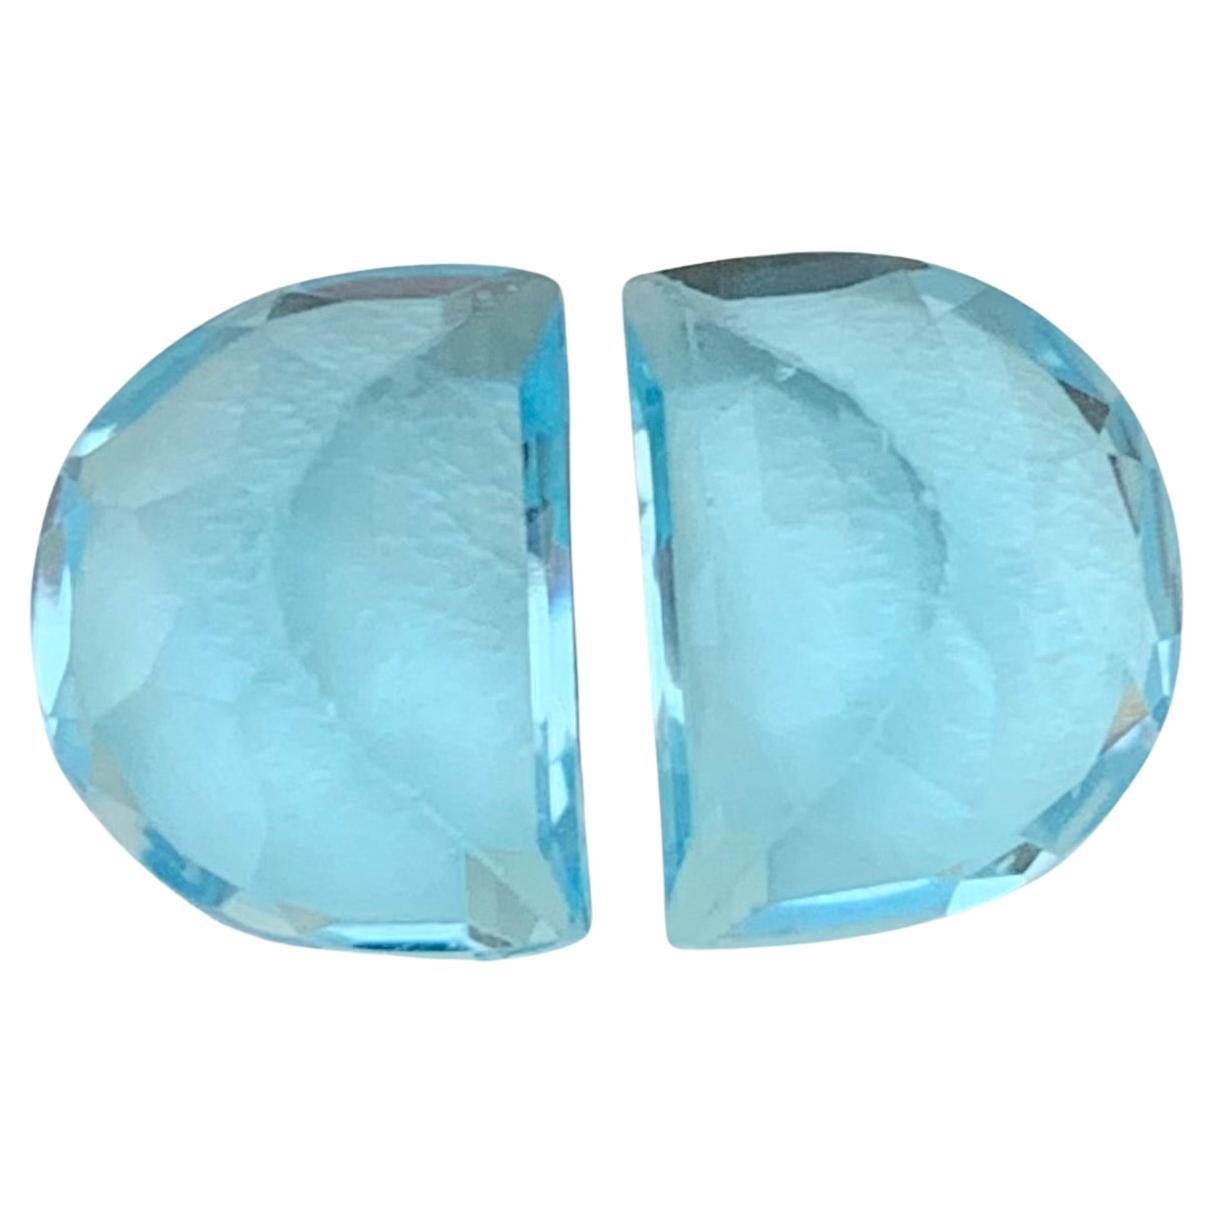 Loose Blue Topaz Pair
Weight: 5.60 Carats 
Dimension: 9.2 x 7.2 x 5.1 Mm
                    9.2 x 7.1 x 5.3 Mm
Origin: Brazil 
Colour: Blue 
Certificate: On Demand 
Shape: Crescent 

Blue topaz is a stunning gemstone prized for its vibrant blue